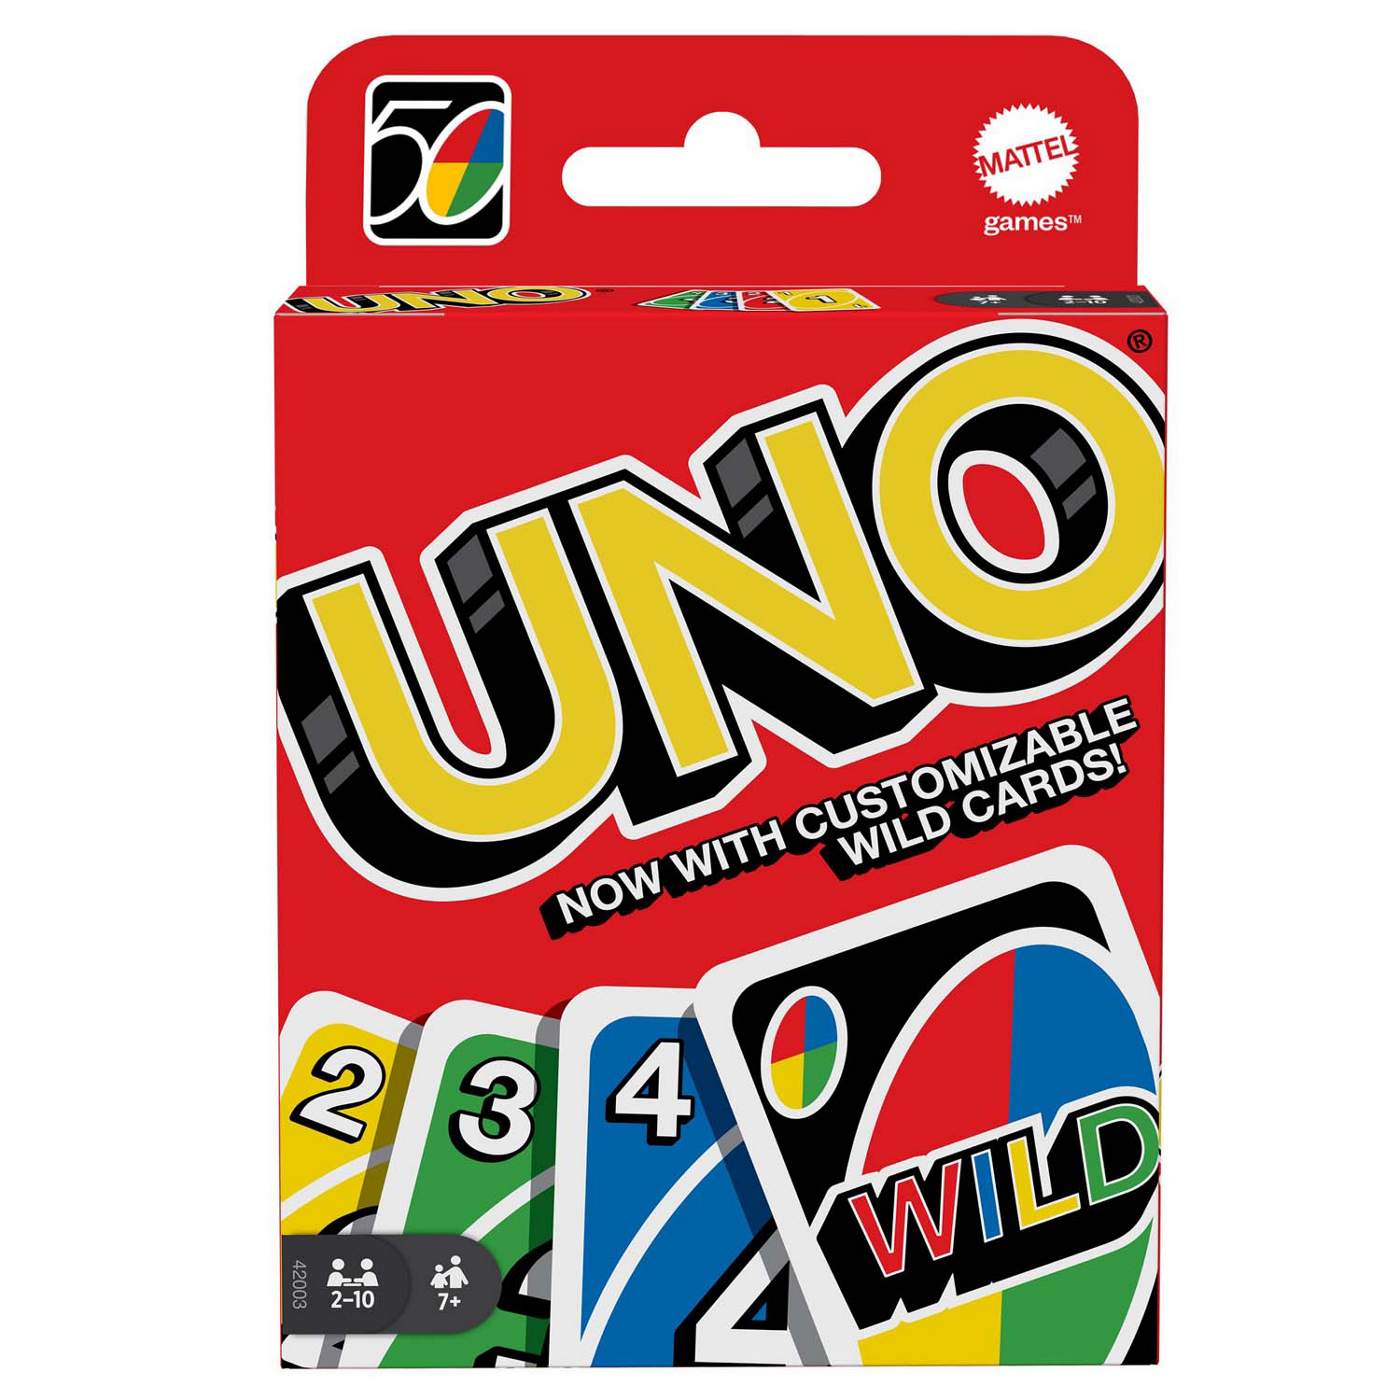 UNO Rules You Don't Have To Say 'UNO Out' On Last Card